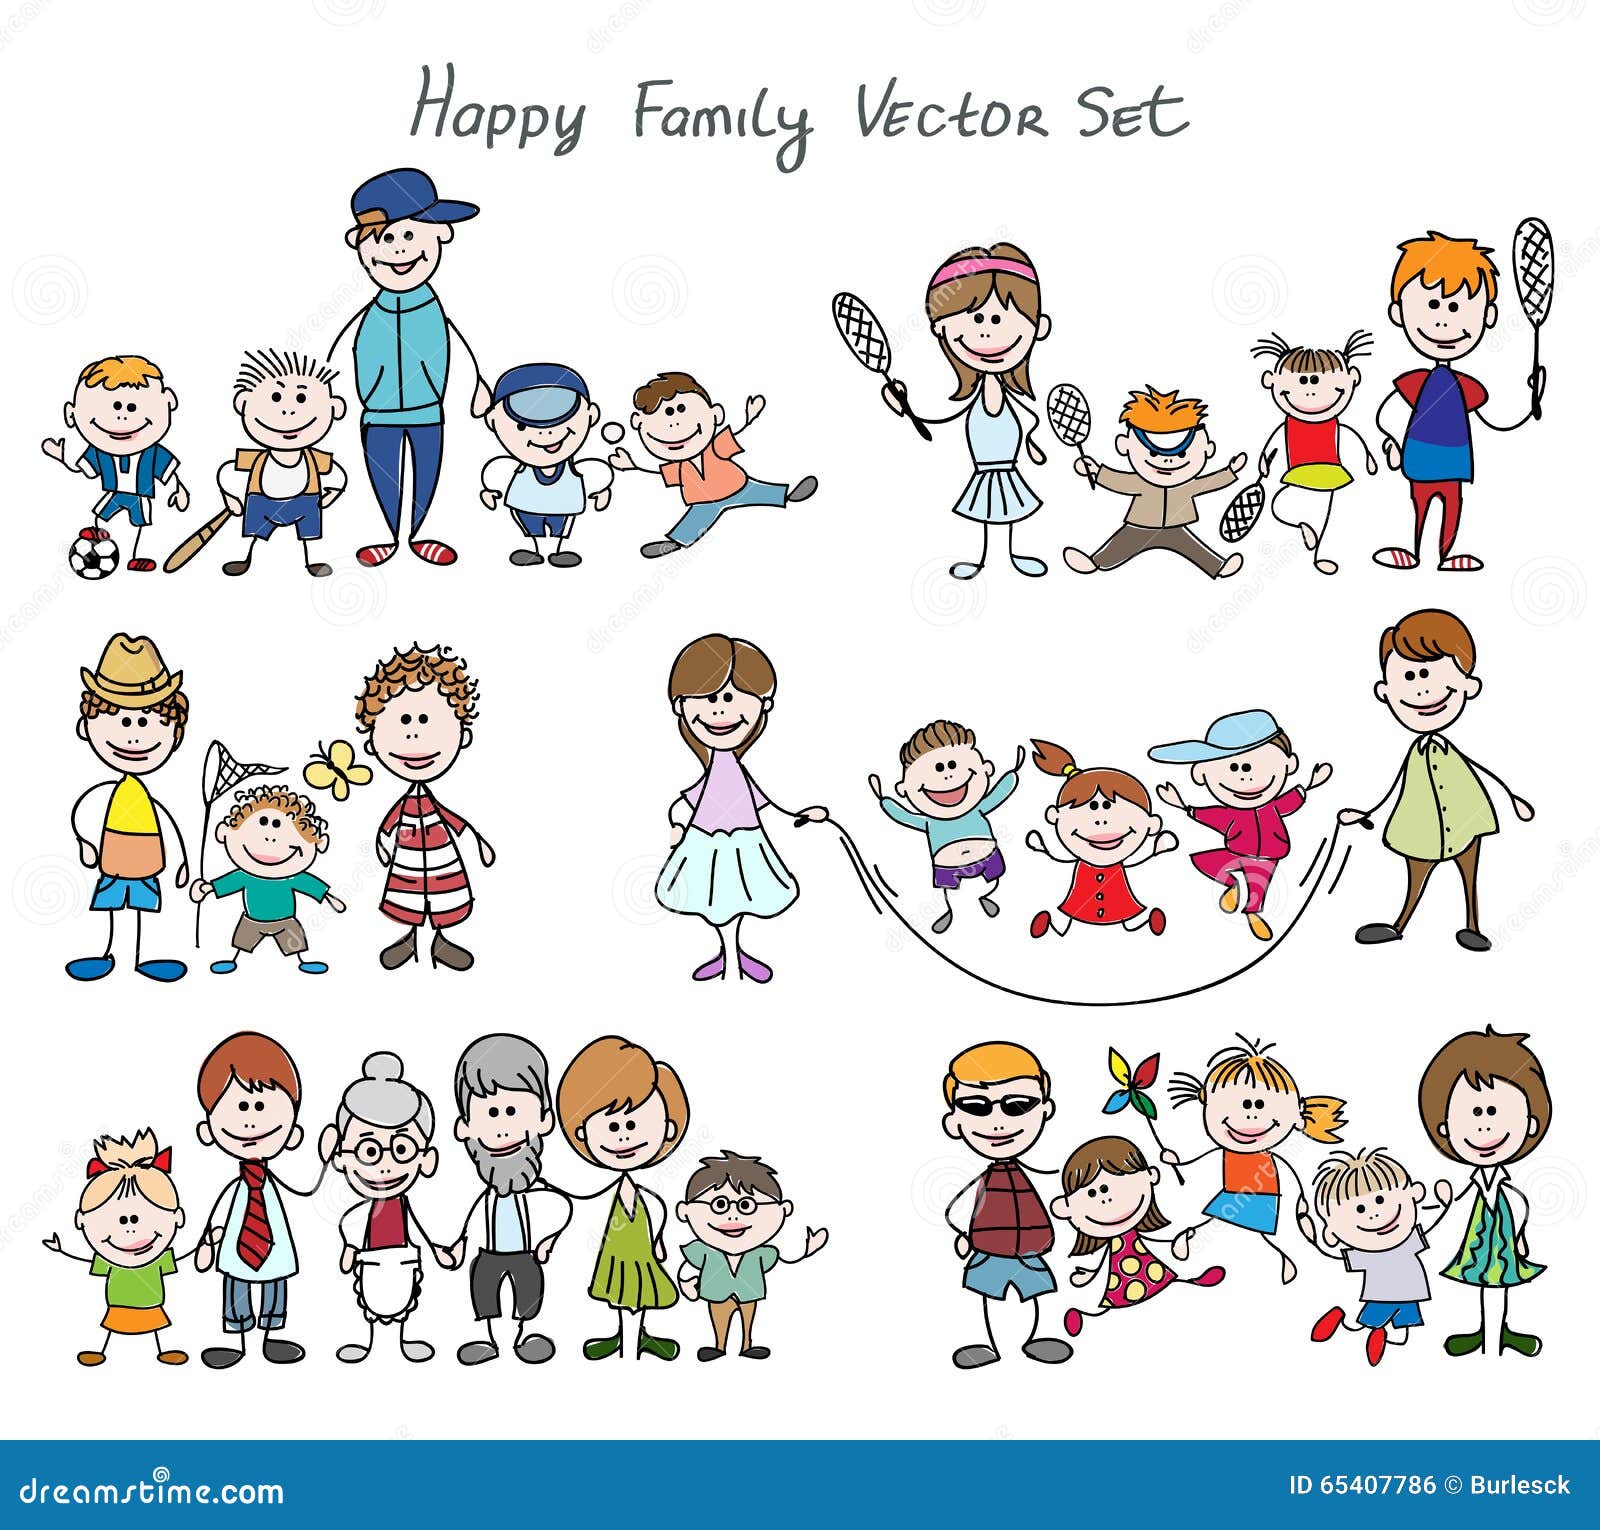 Stock Image Details ING1906118626  I love my family Sketch funny image  of happy parents and children